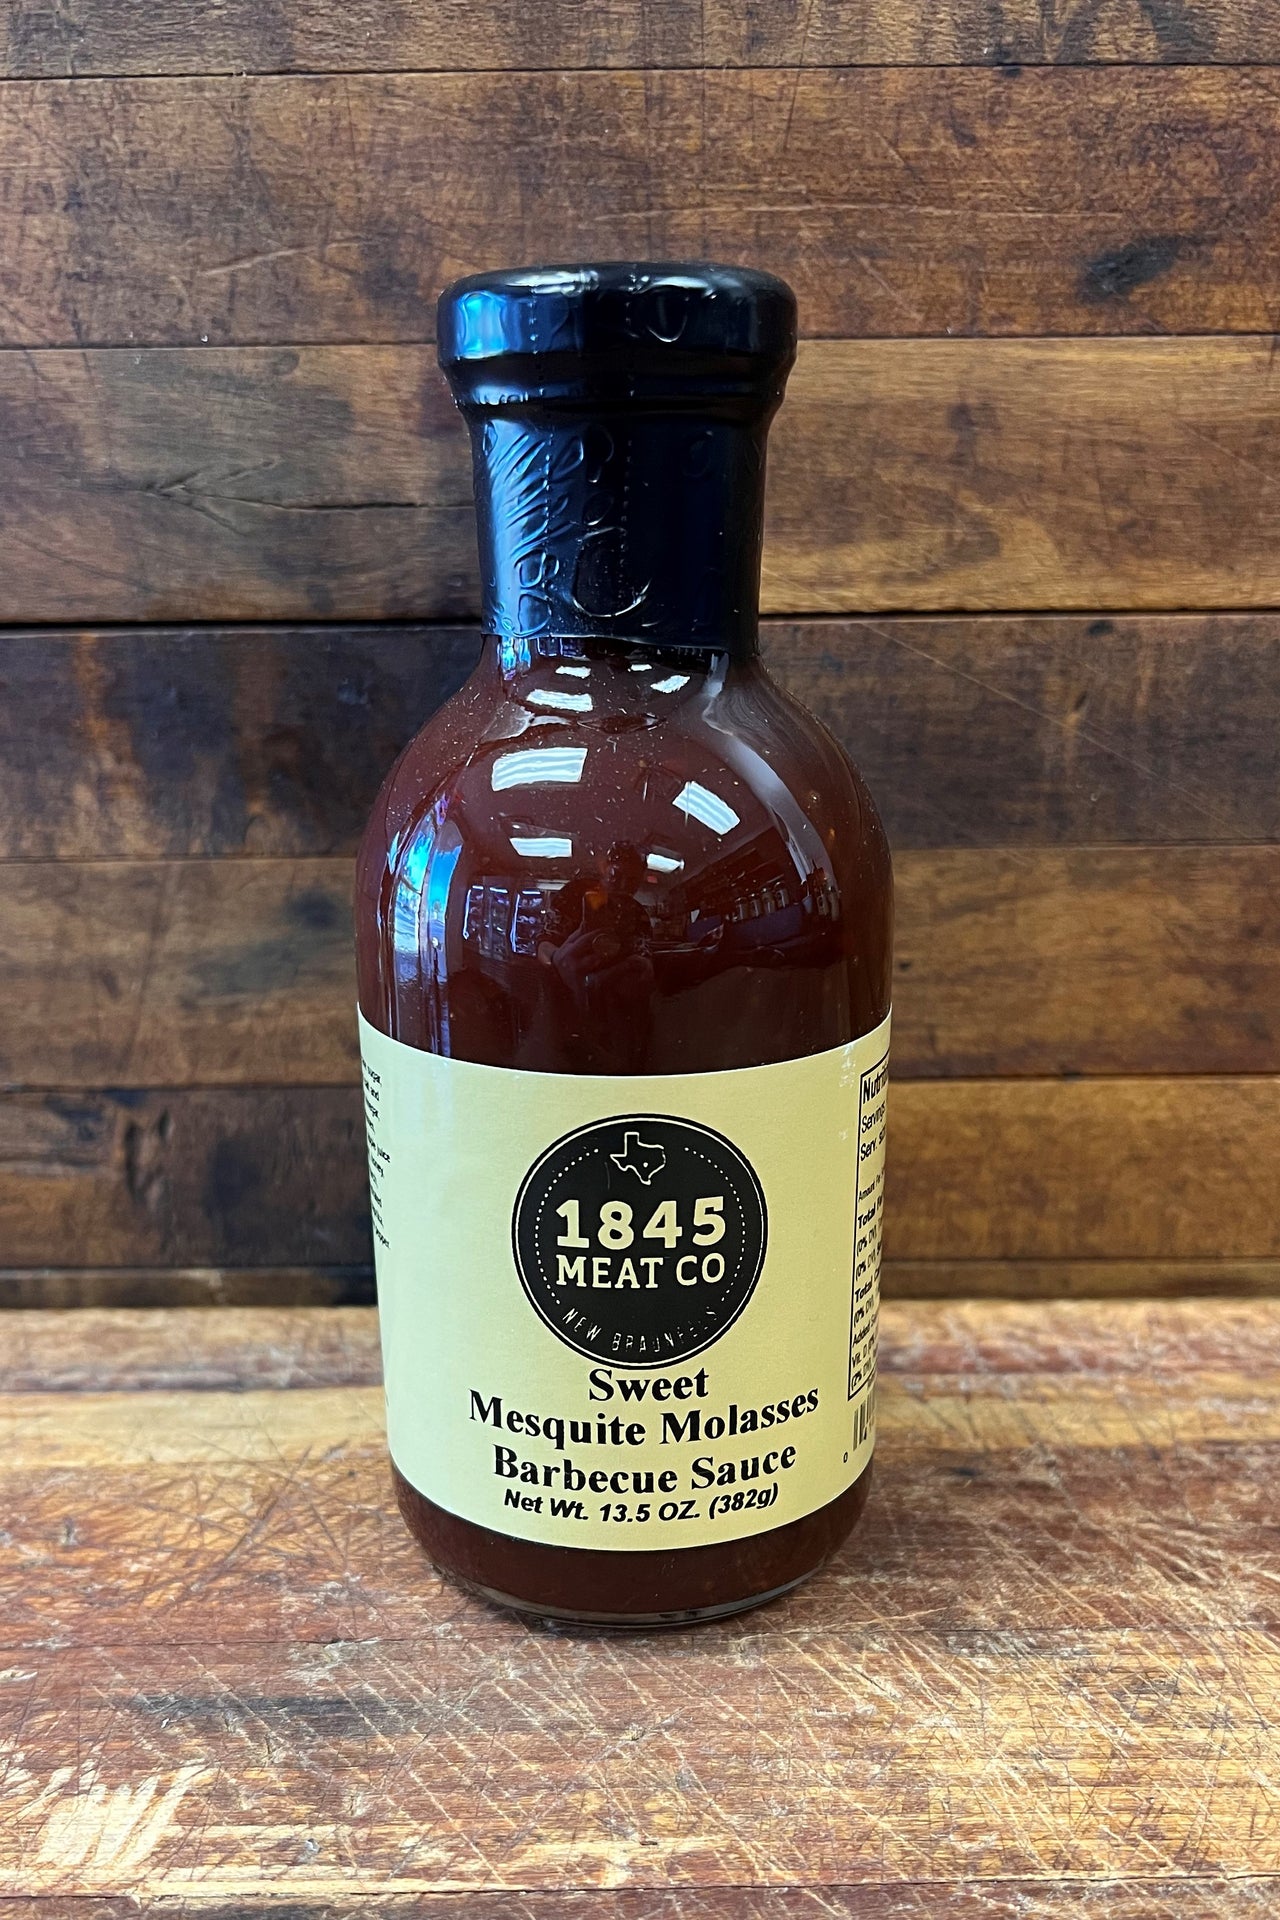 The smoky sweet flavor of this BBQ Sauce adds a deep flavor to all items you add it to.﻿